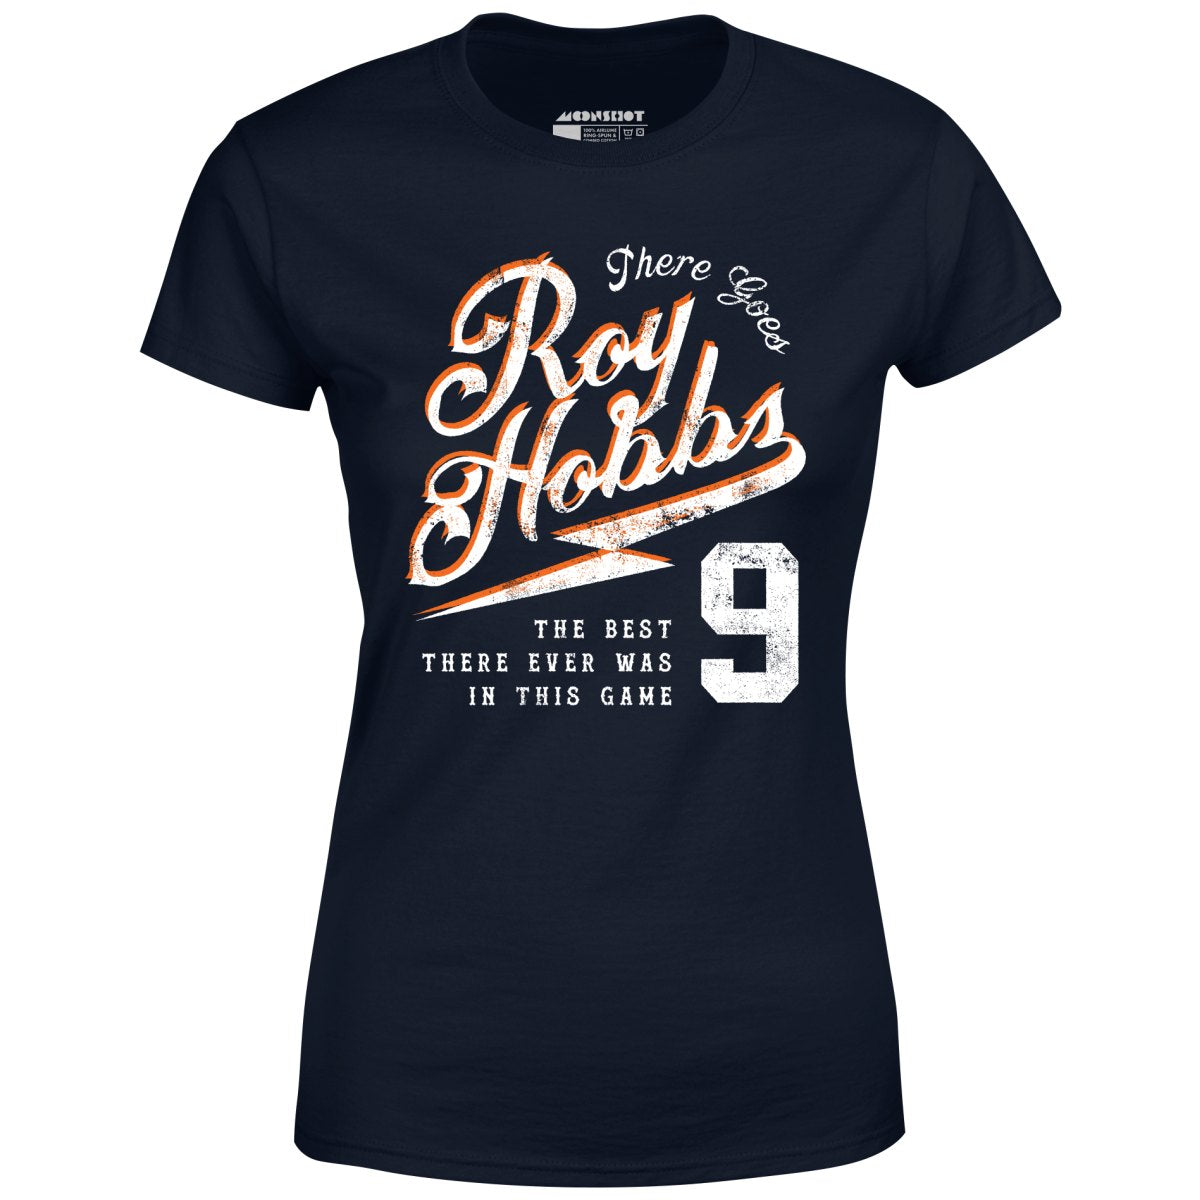 There Goes Roy Hobbs - Women's T-Shirt